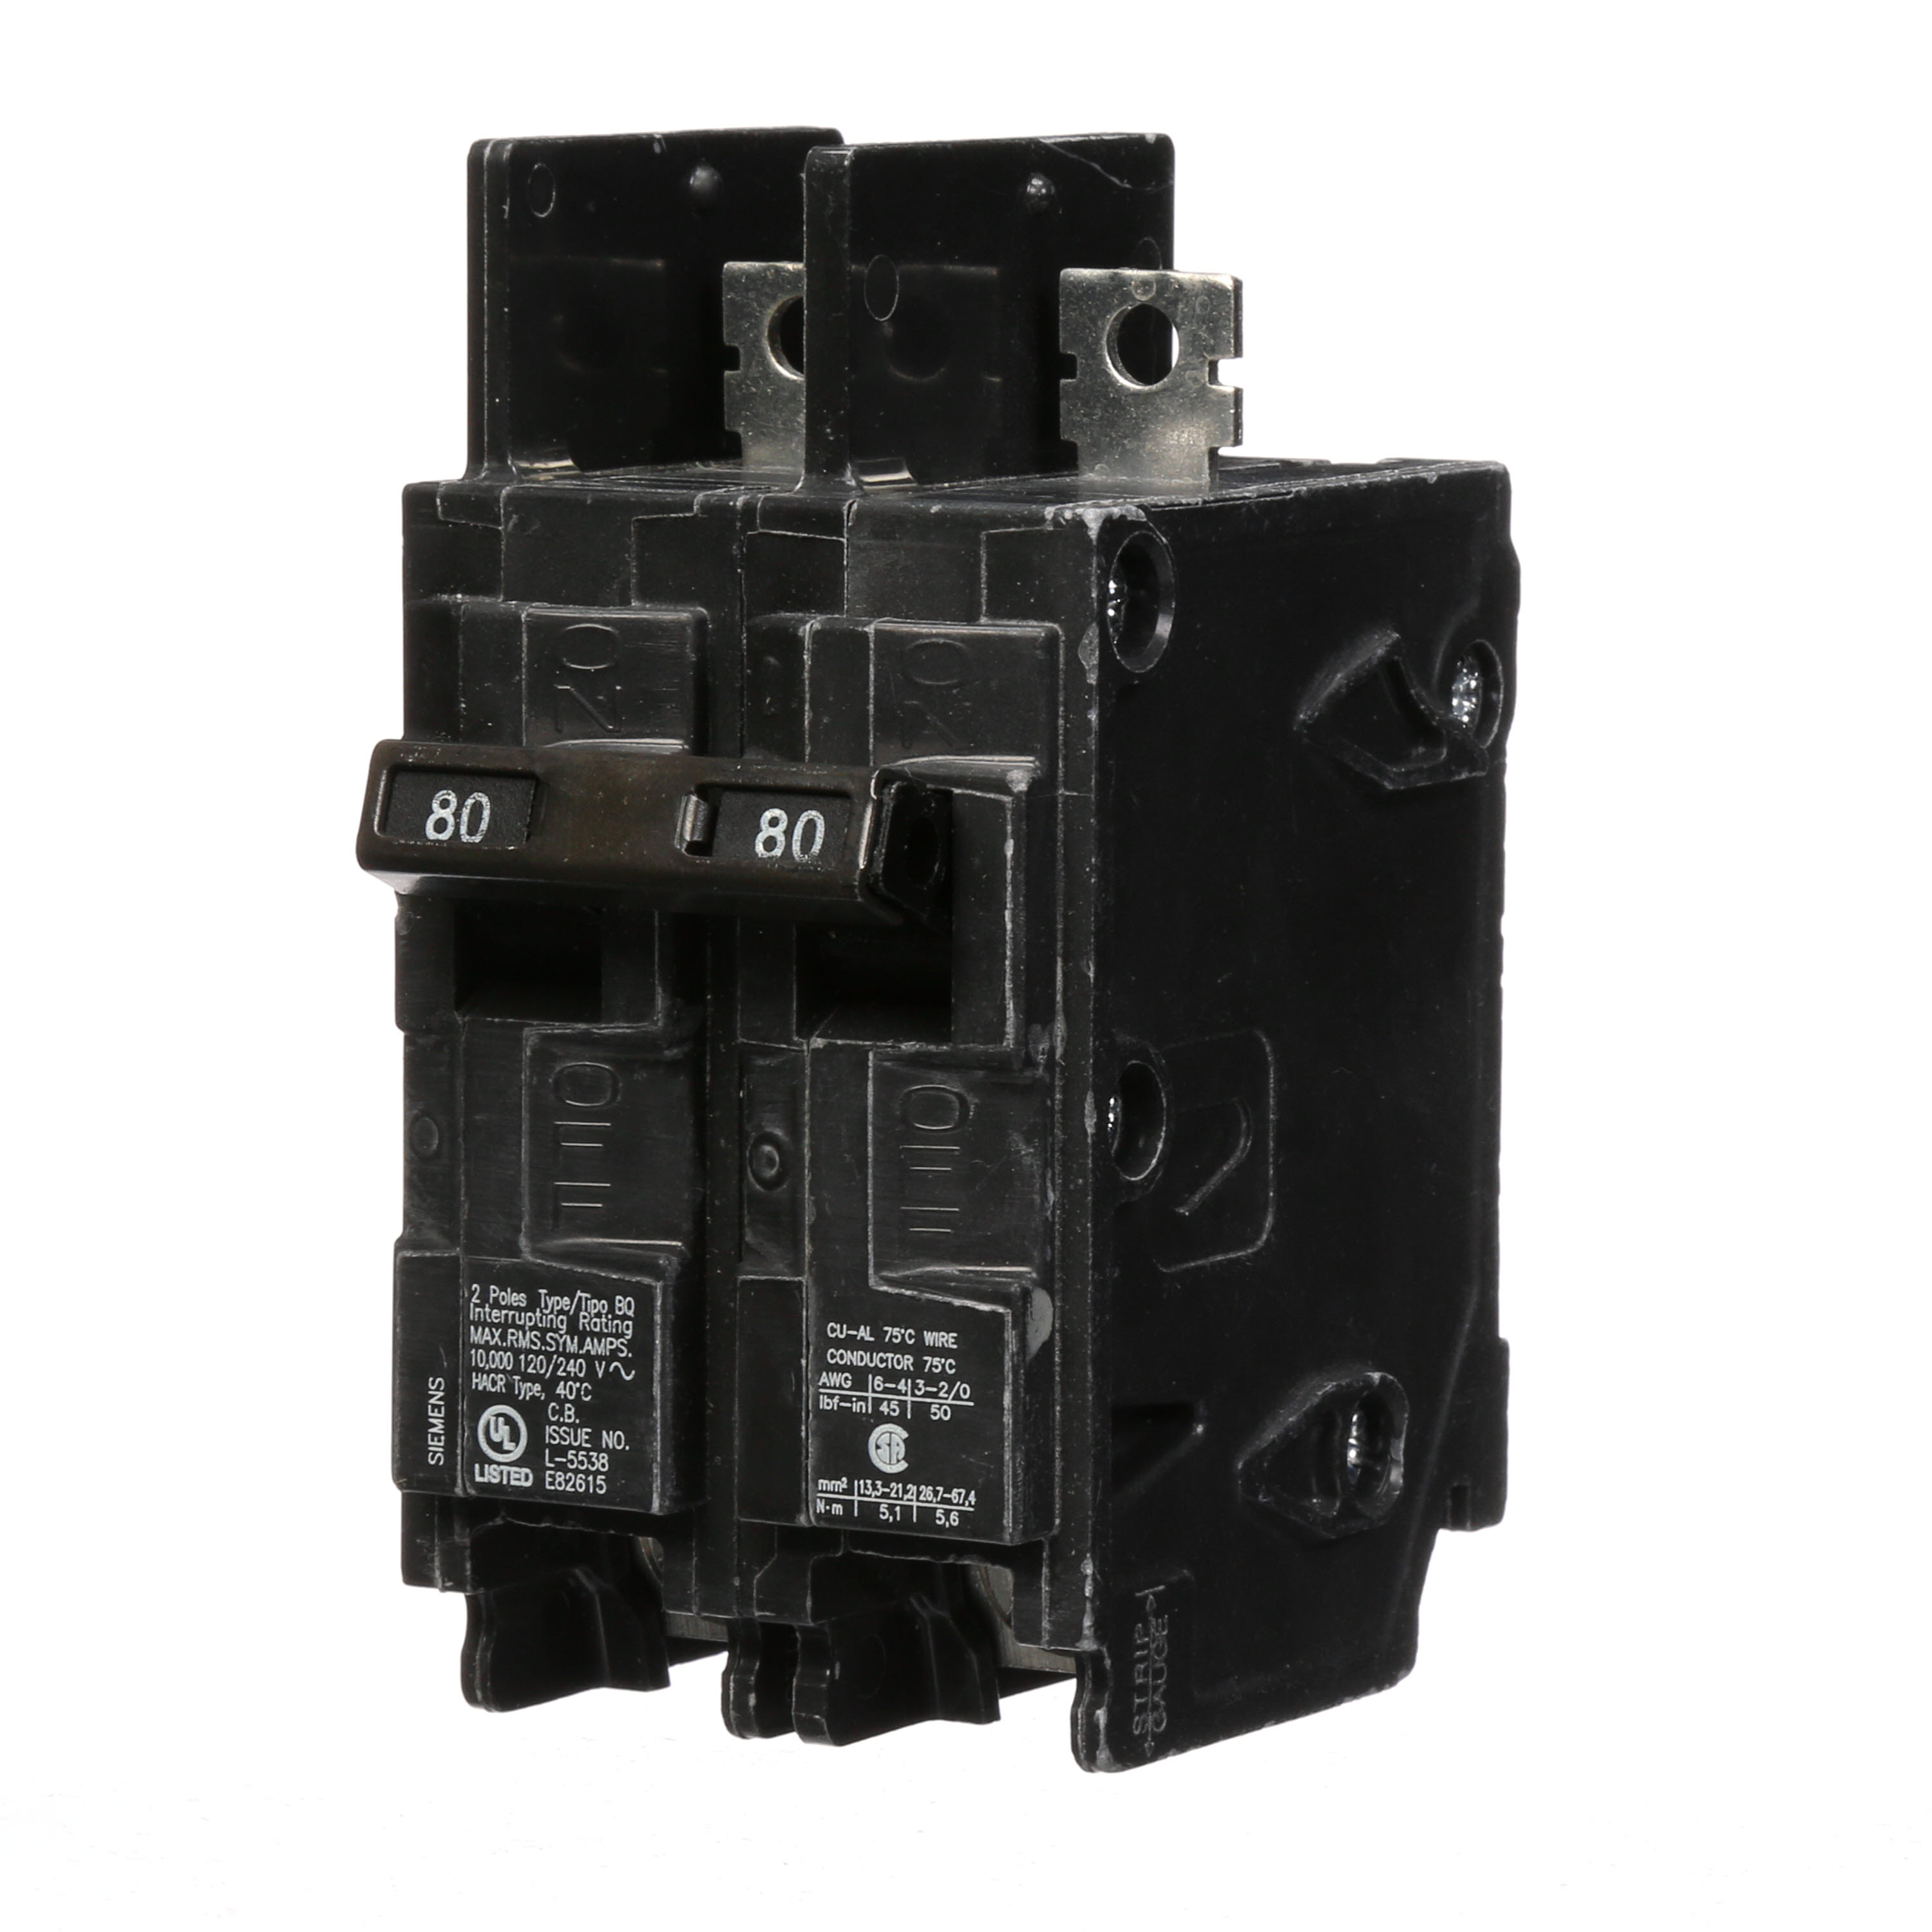 Siemens Low Voltage Molded Case Circuit Breakers General Purpose MCCBs - Type BQ, 2-Pole, 120/240VAC are Circuit Protection Molded Case Circuit Breakers. 2-Pole Common-Trip circuit breaker type BQ. Rated 120/240V (080A) (AIR 10 kA). Special features Load side lugs are included.